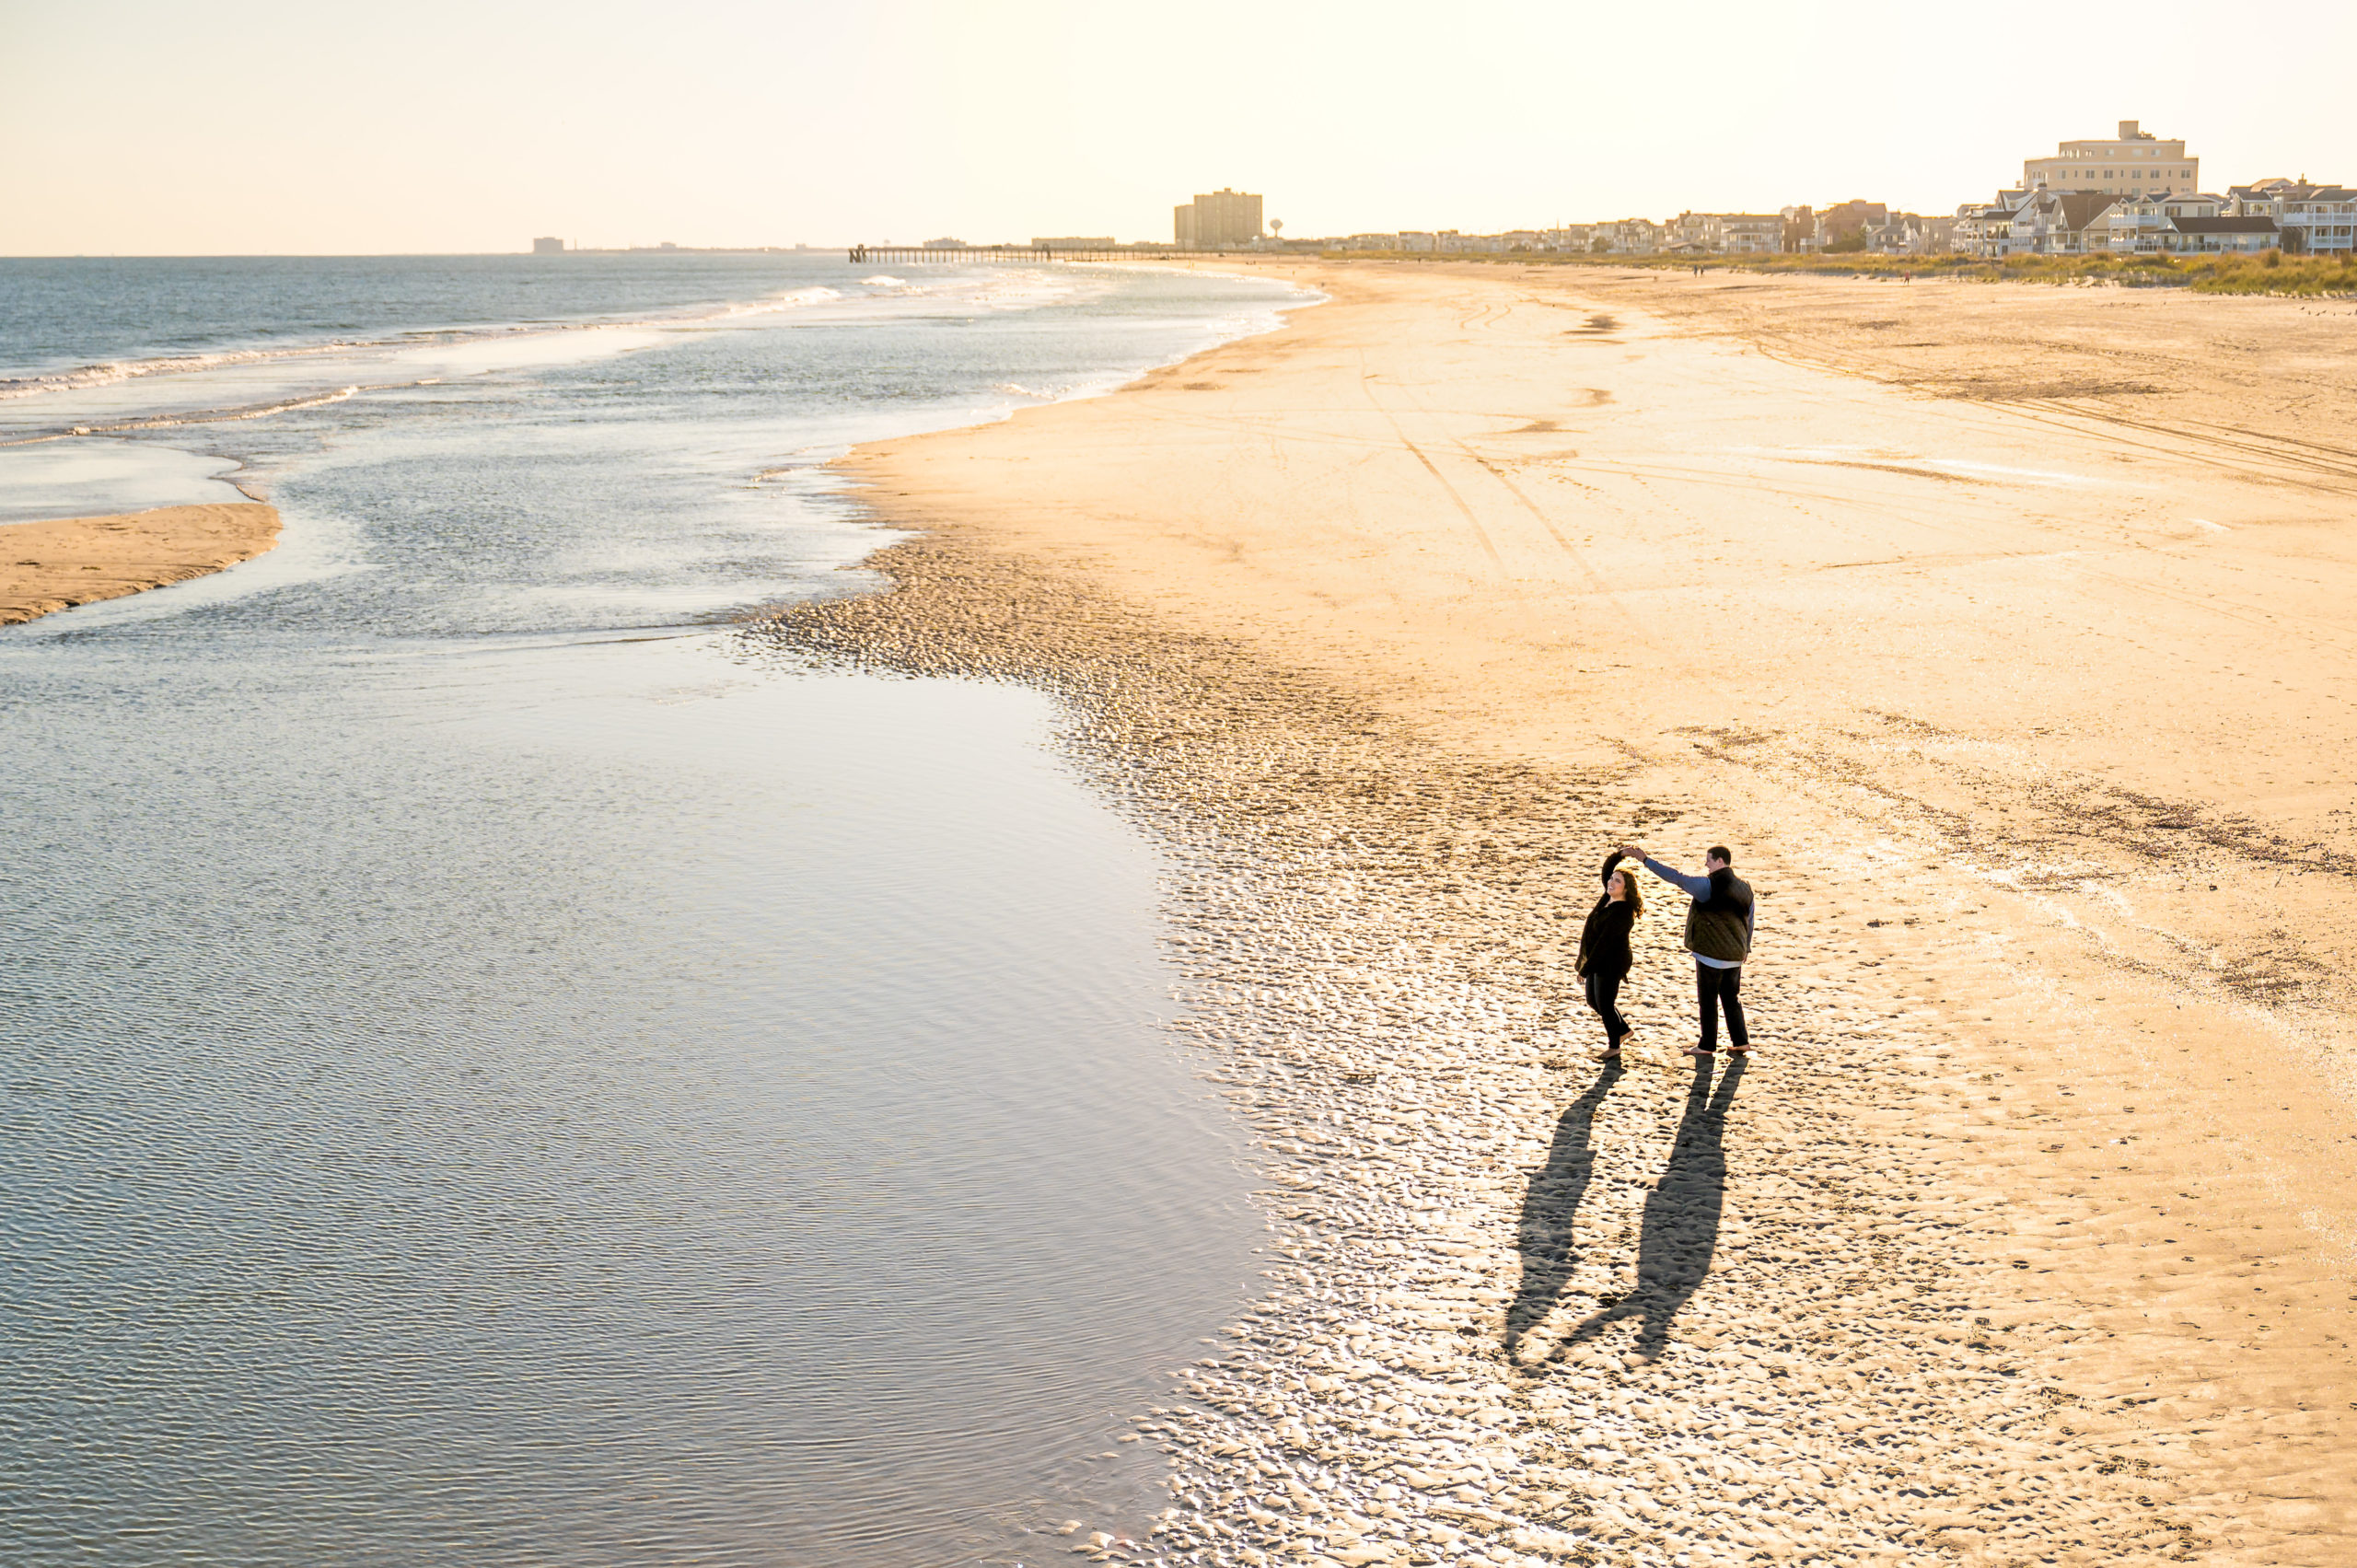 Engagement photo of a couple walking on a Jersey Shore beach taken from a high angle